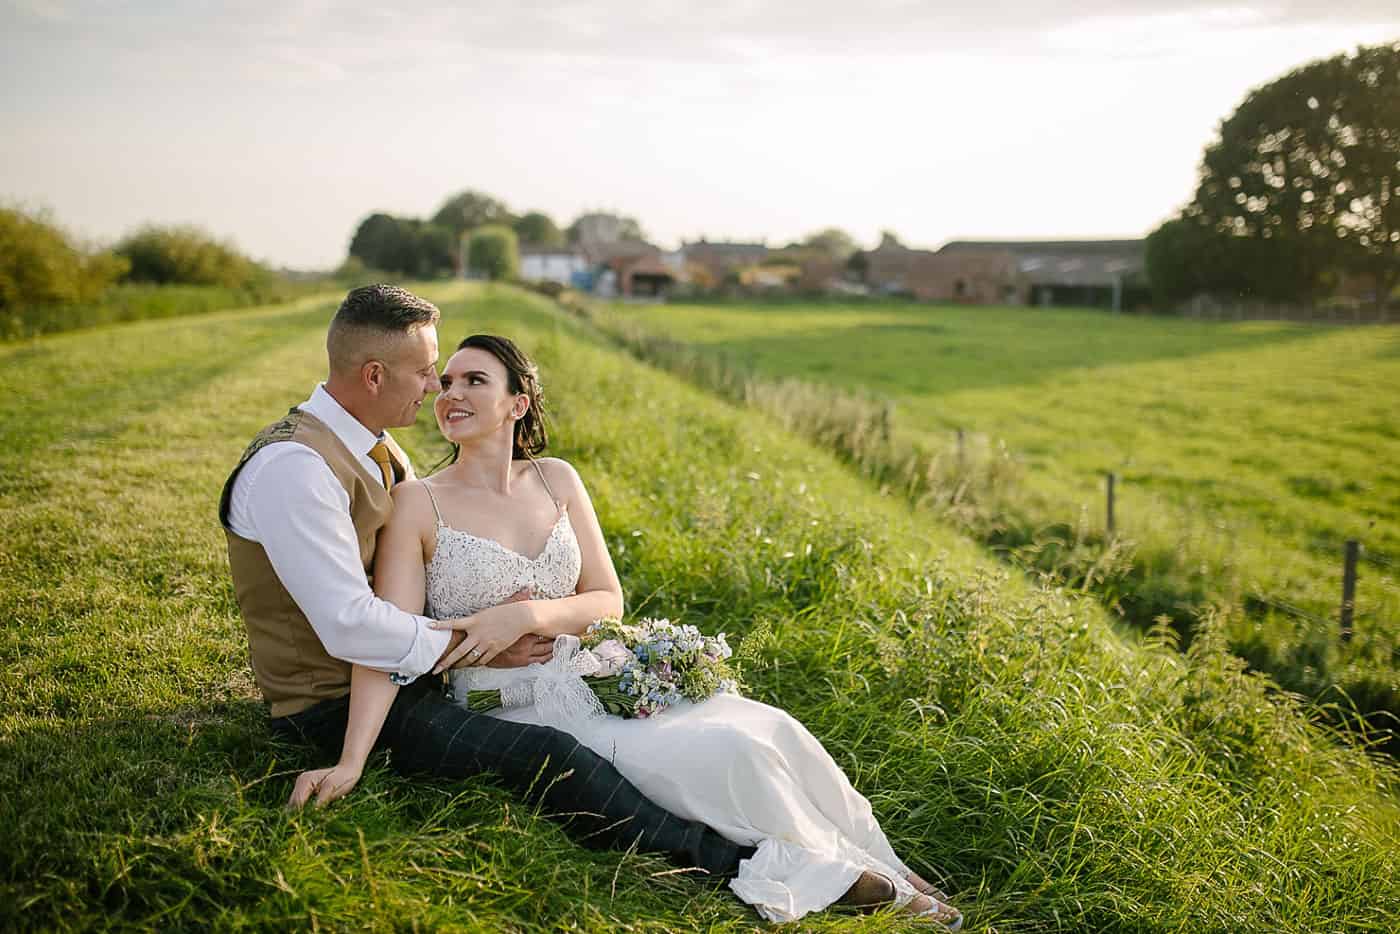 relive those laughs with someone local to scunthorpe through wedding photography